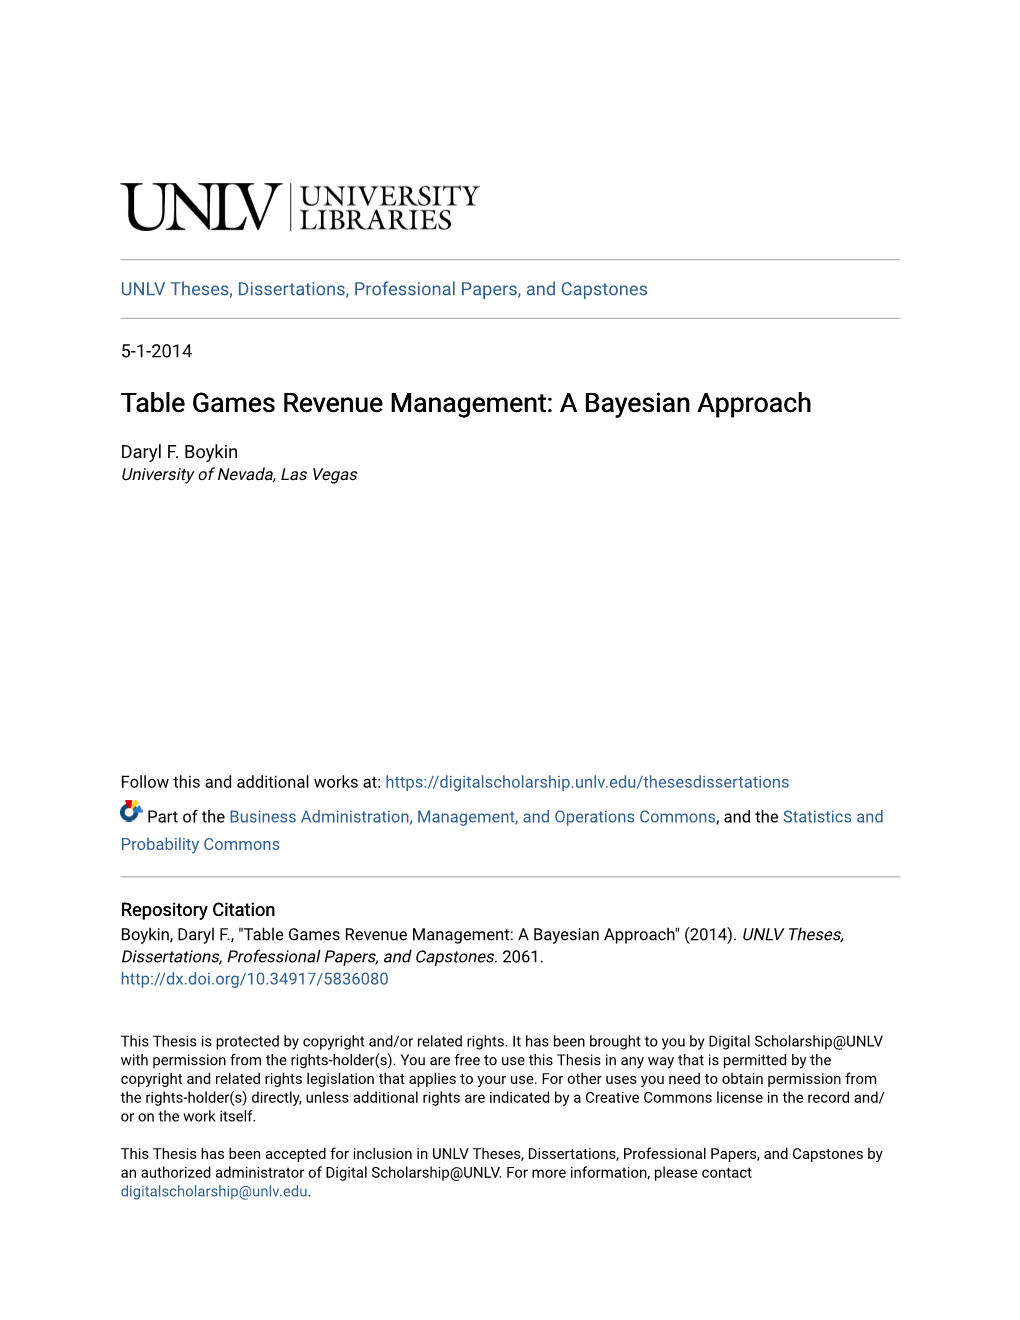 Table Games Revenue Management: a Bayesian Approach